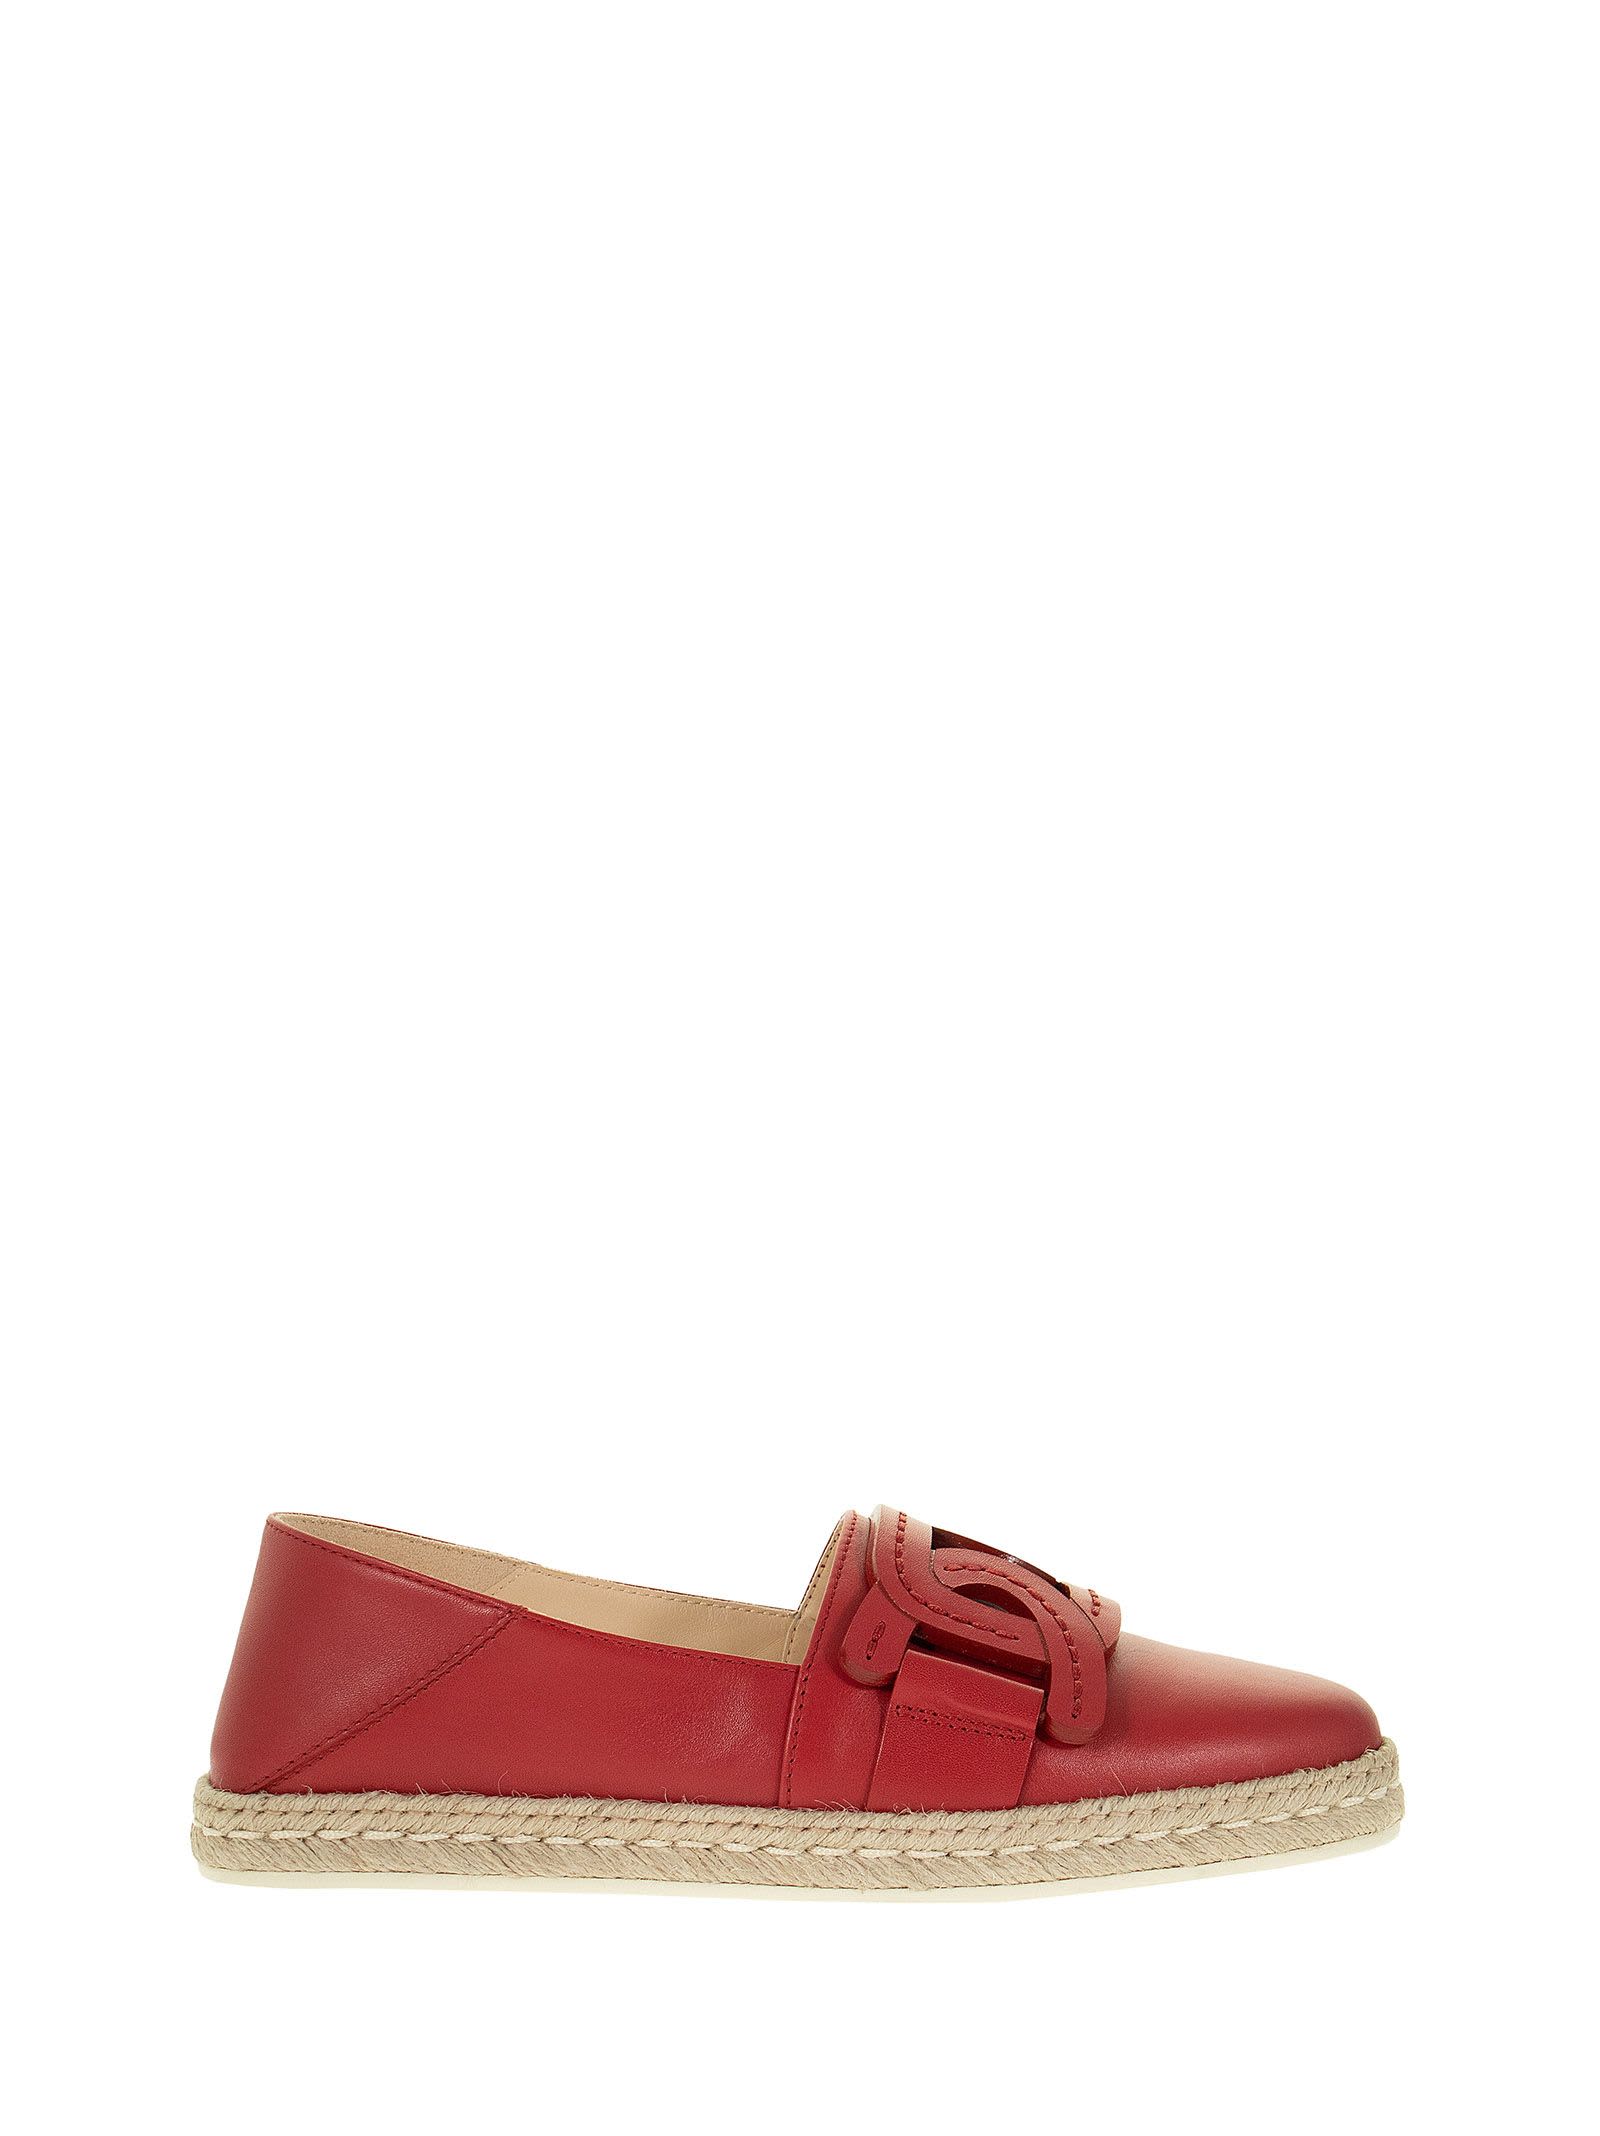 TOD'S SLIP-ONS IN LEATHER,XXW66B0EM80MIDR401